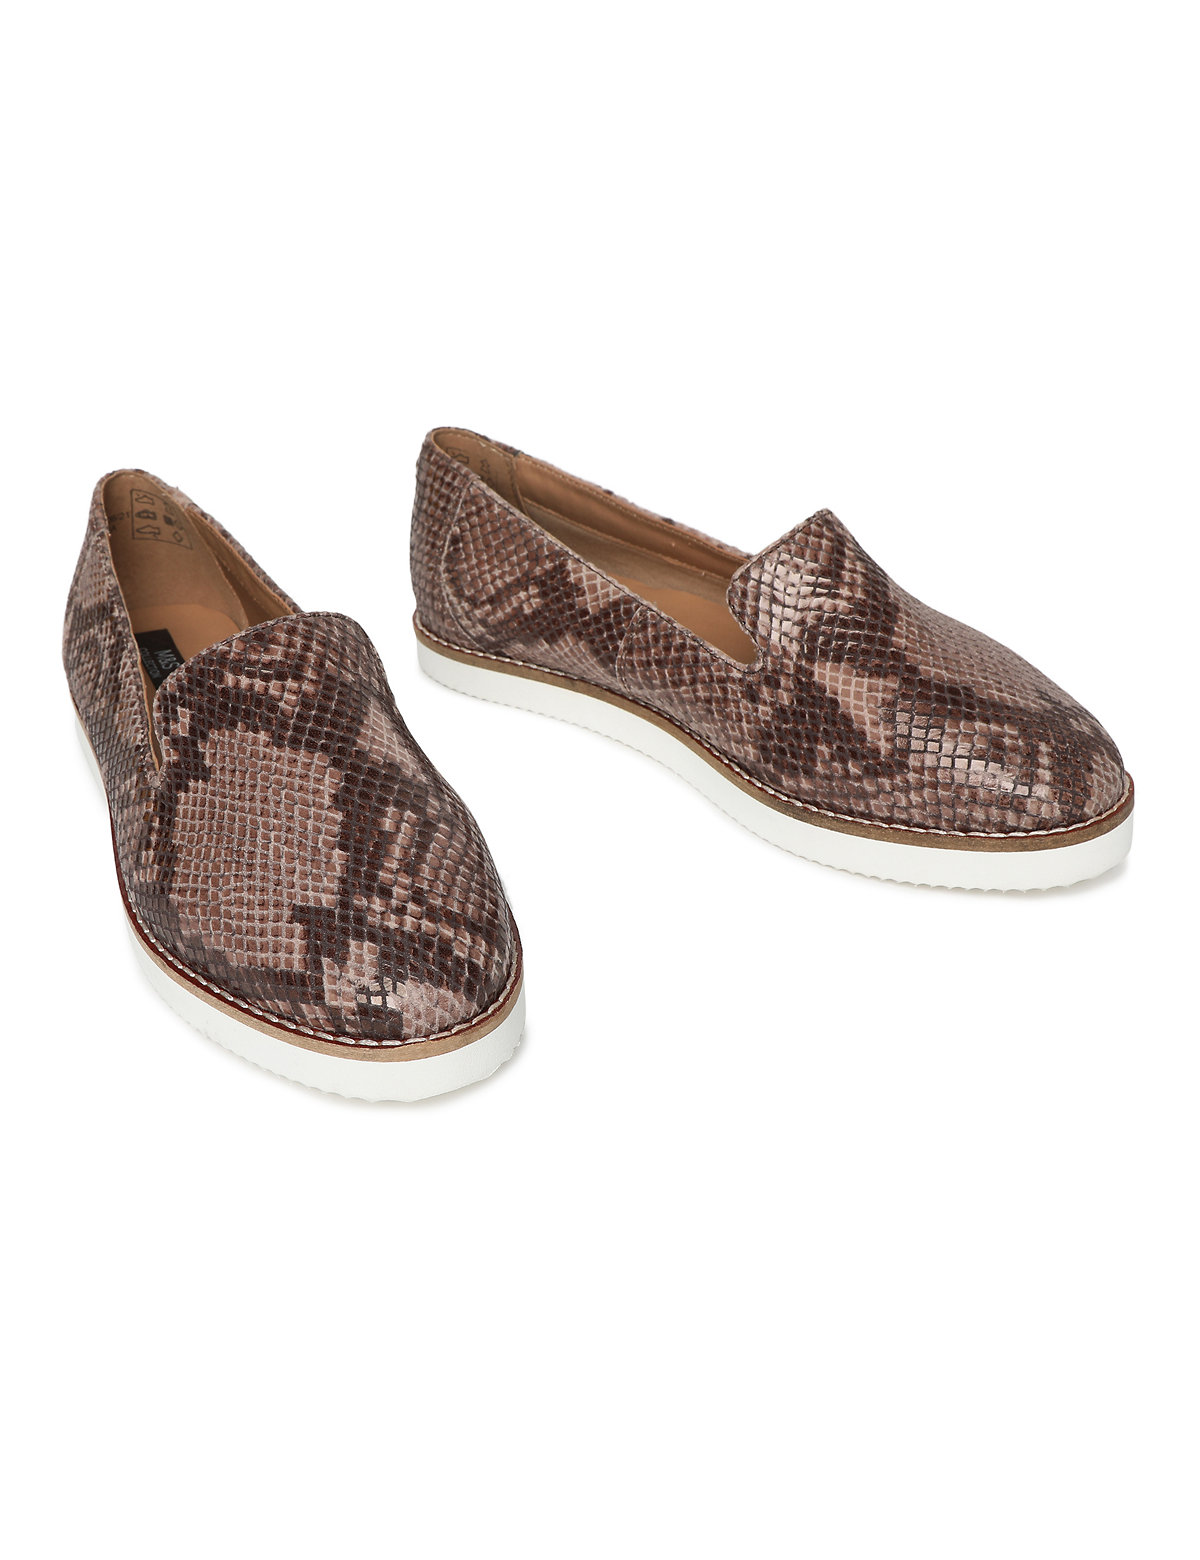 Leather Snake Print Shoes